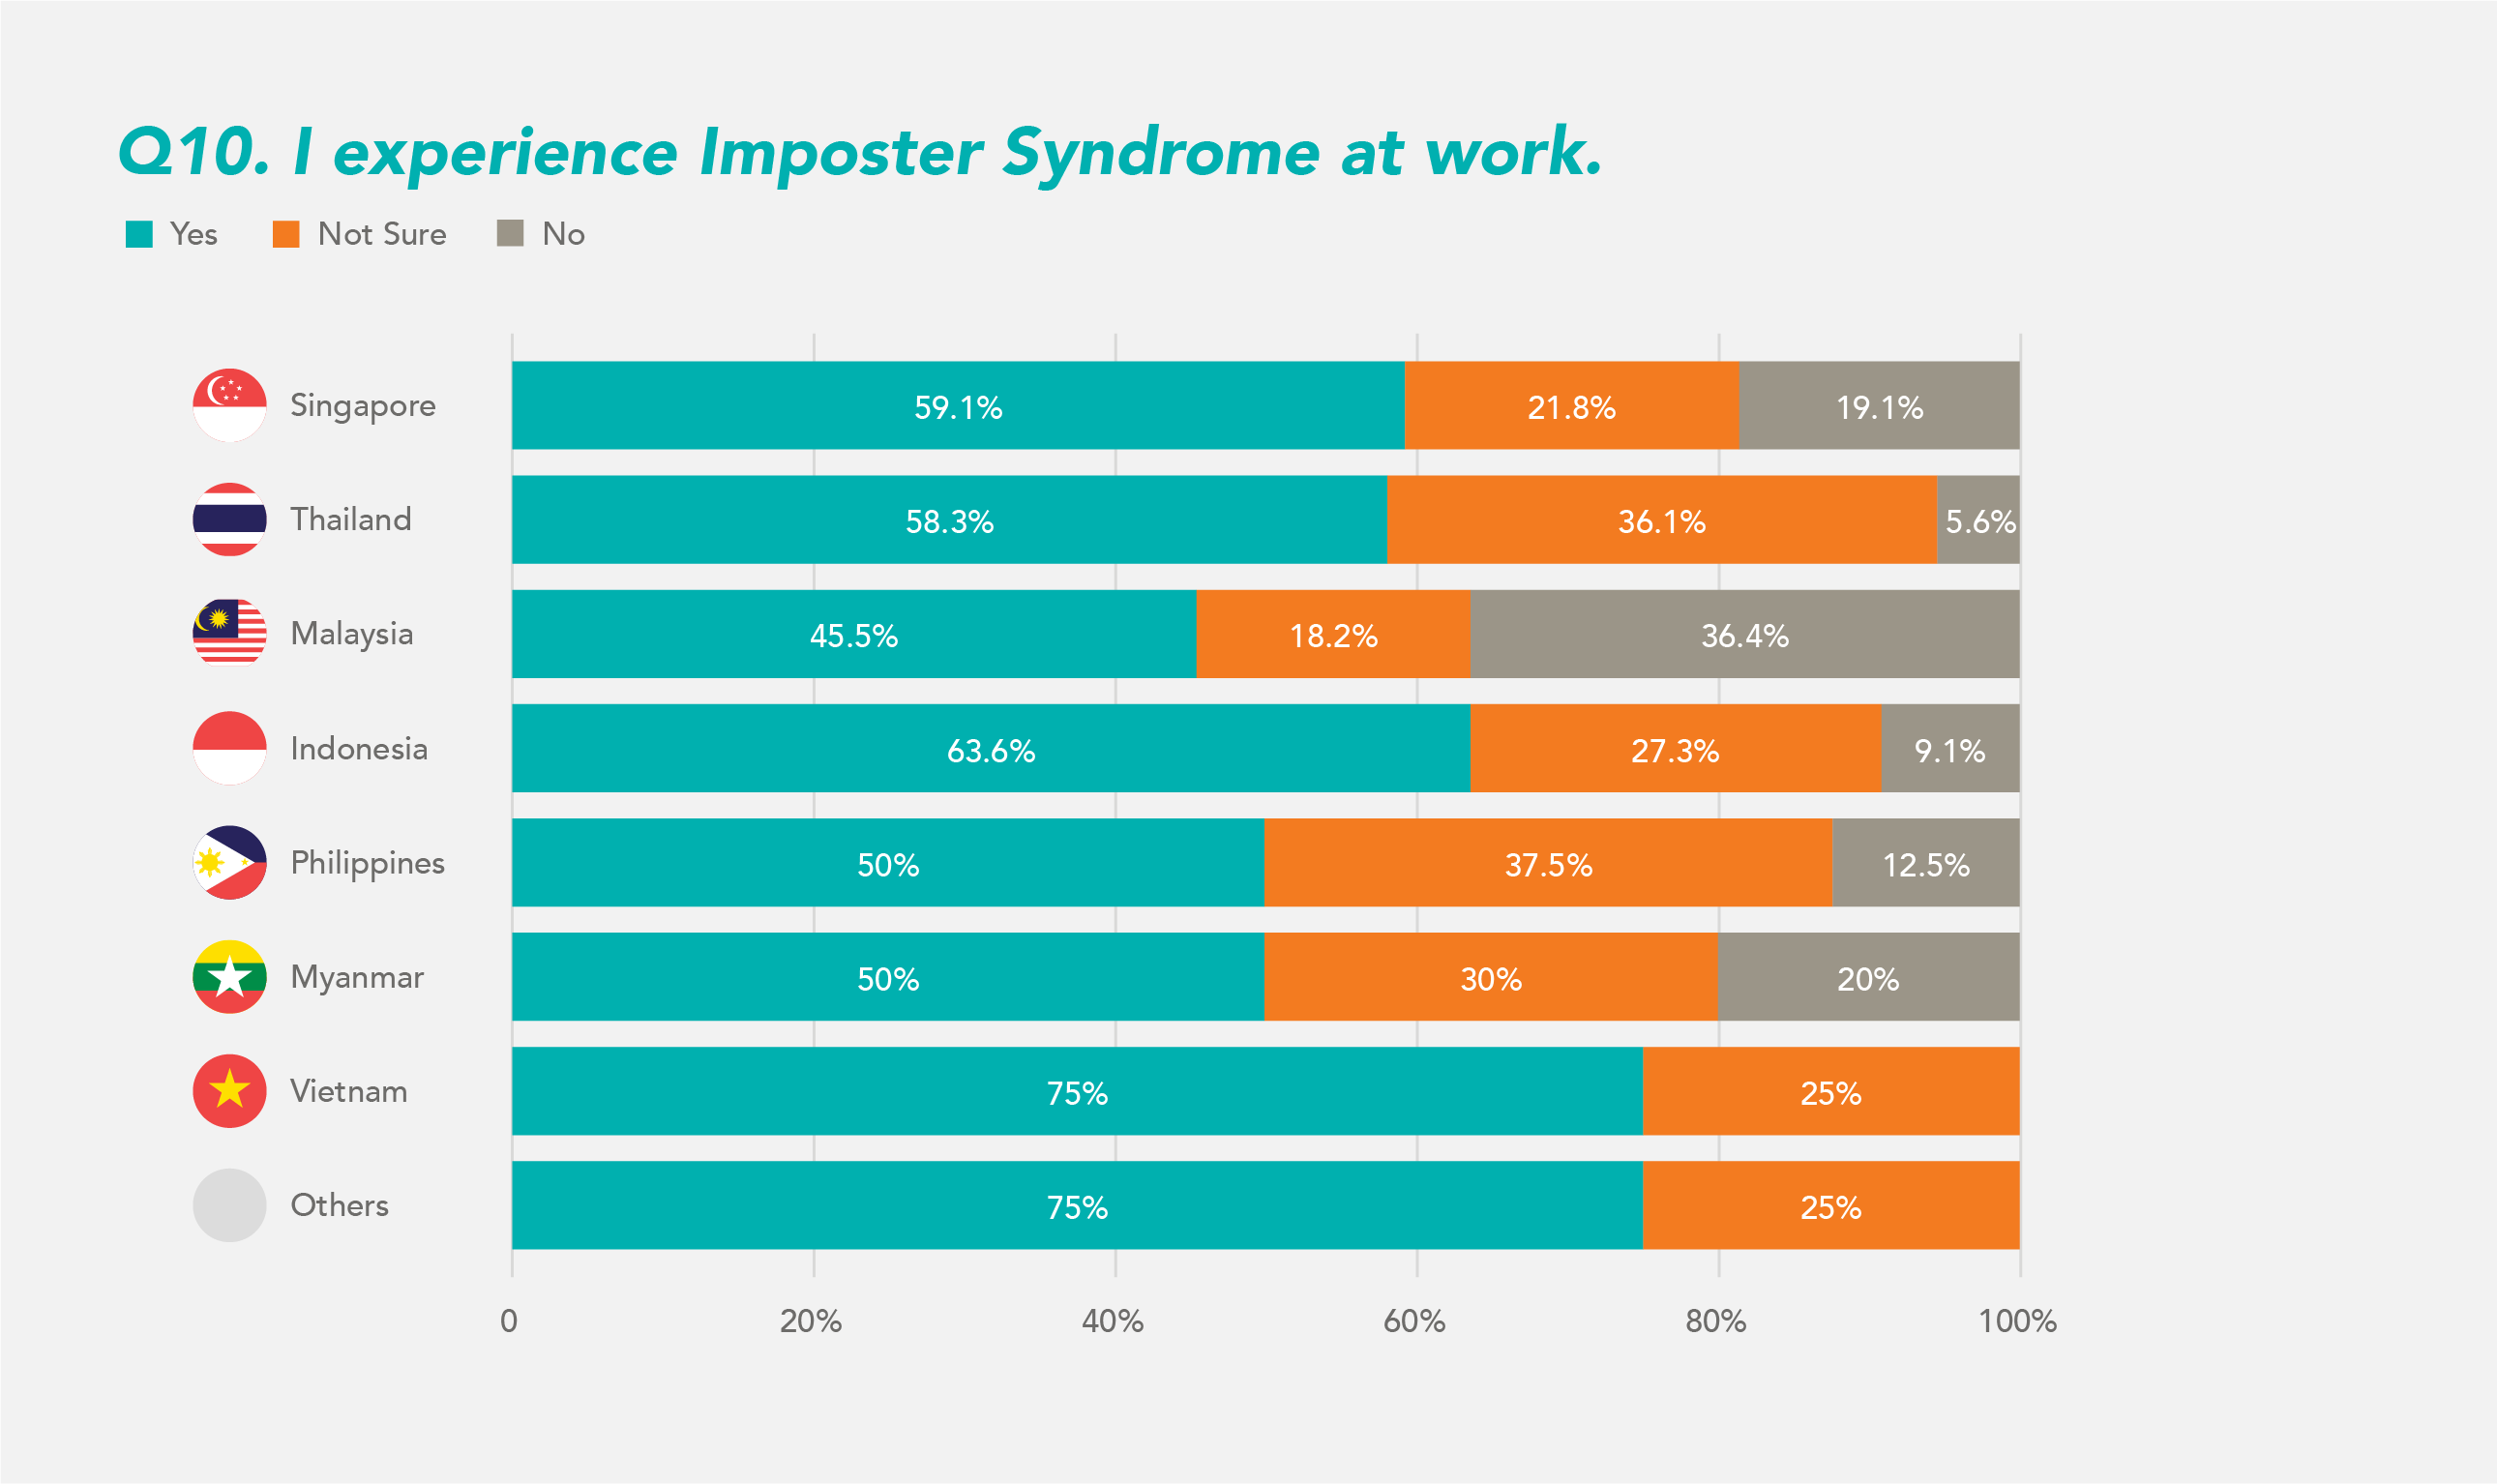 Imposter Syndrome by Countries